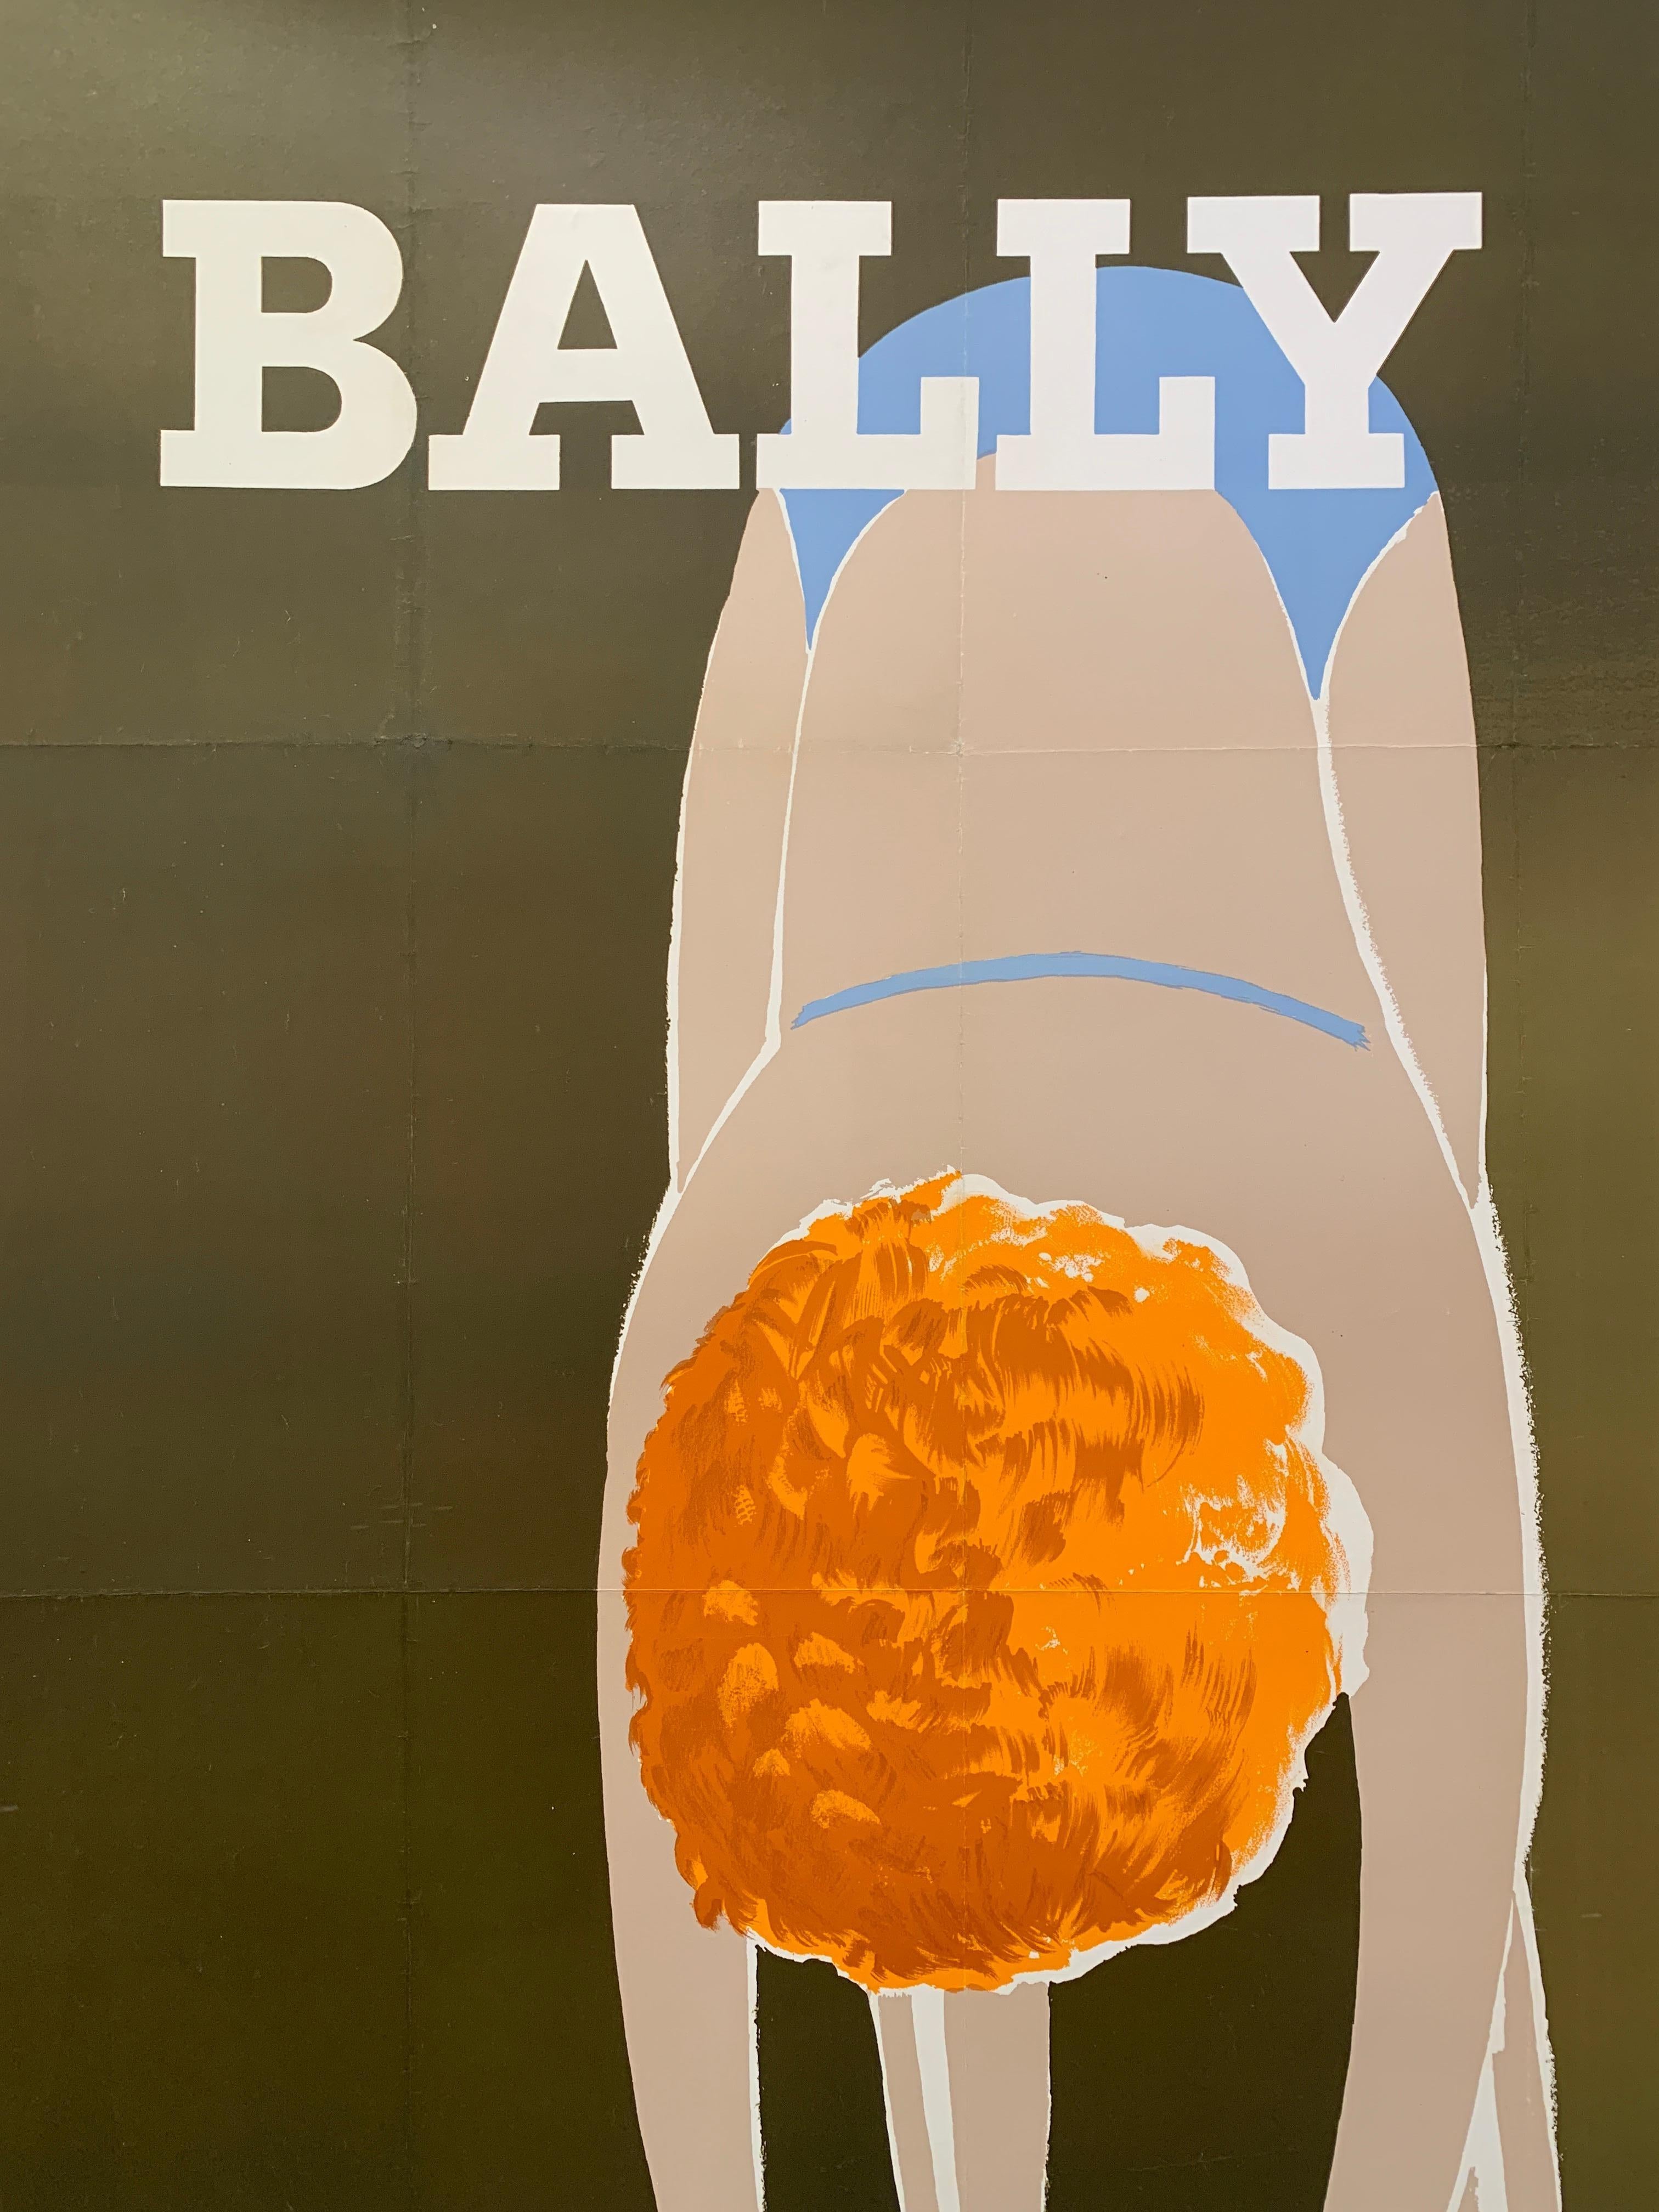 Modern Bally Ballet Original Vintage French Fashion Poster by Fix-Masseau, 1981 For Sale